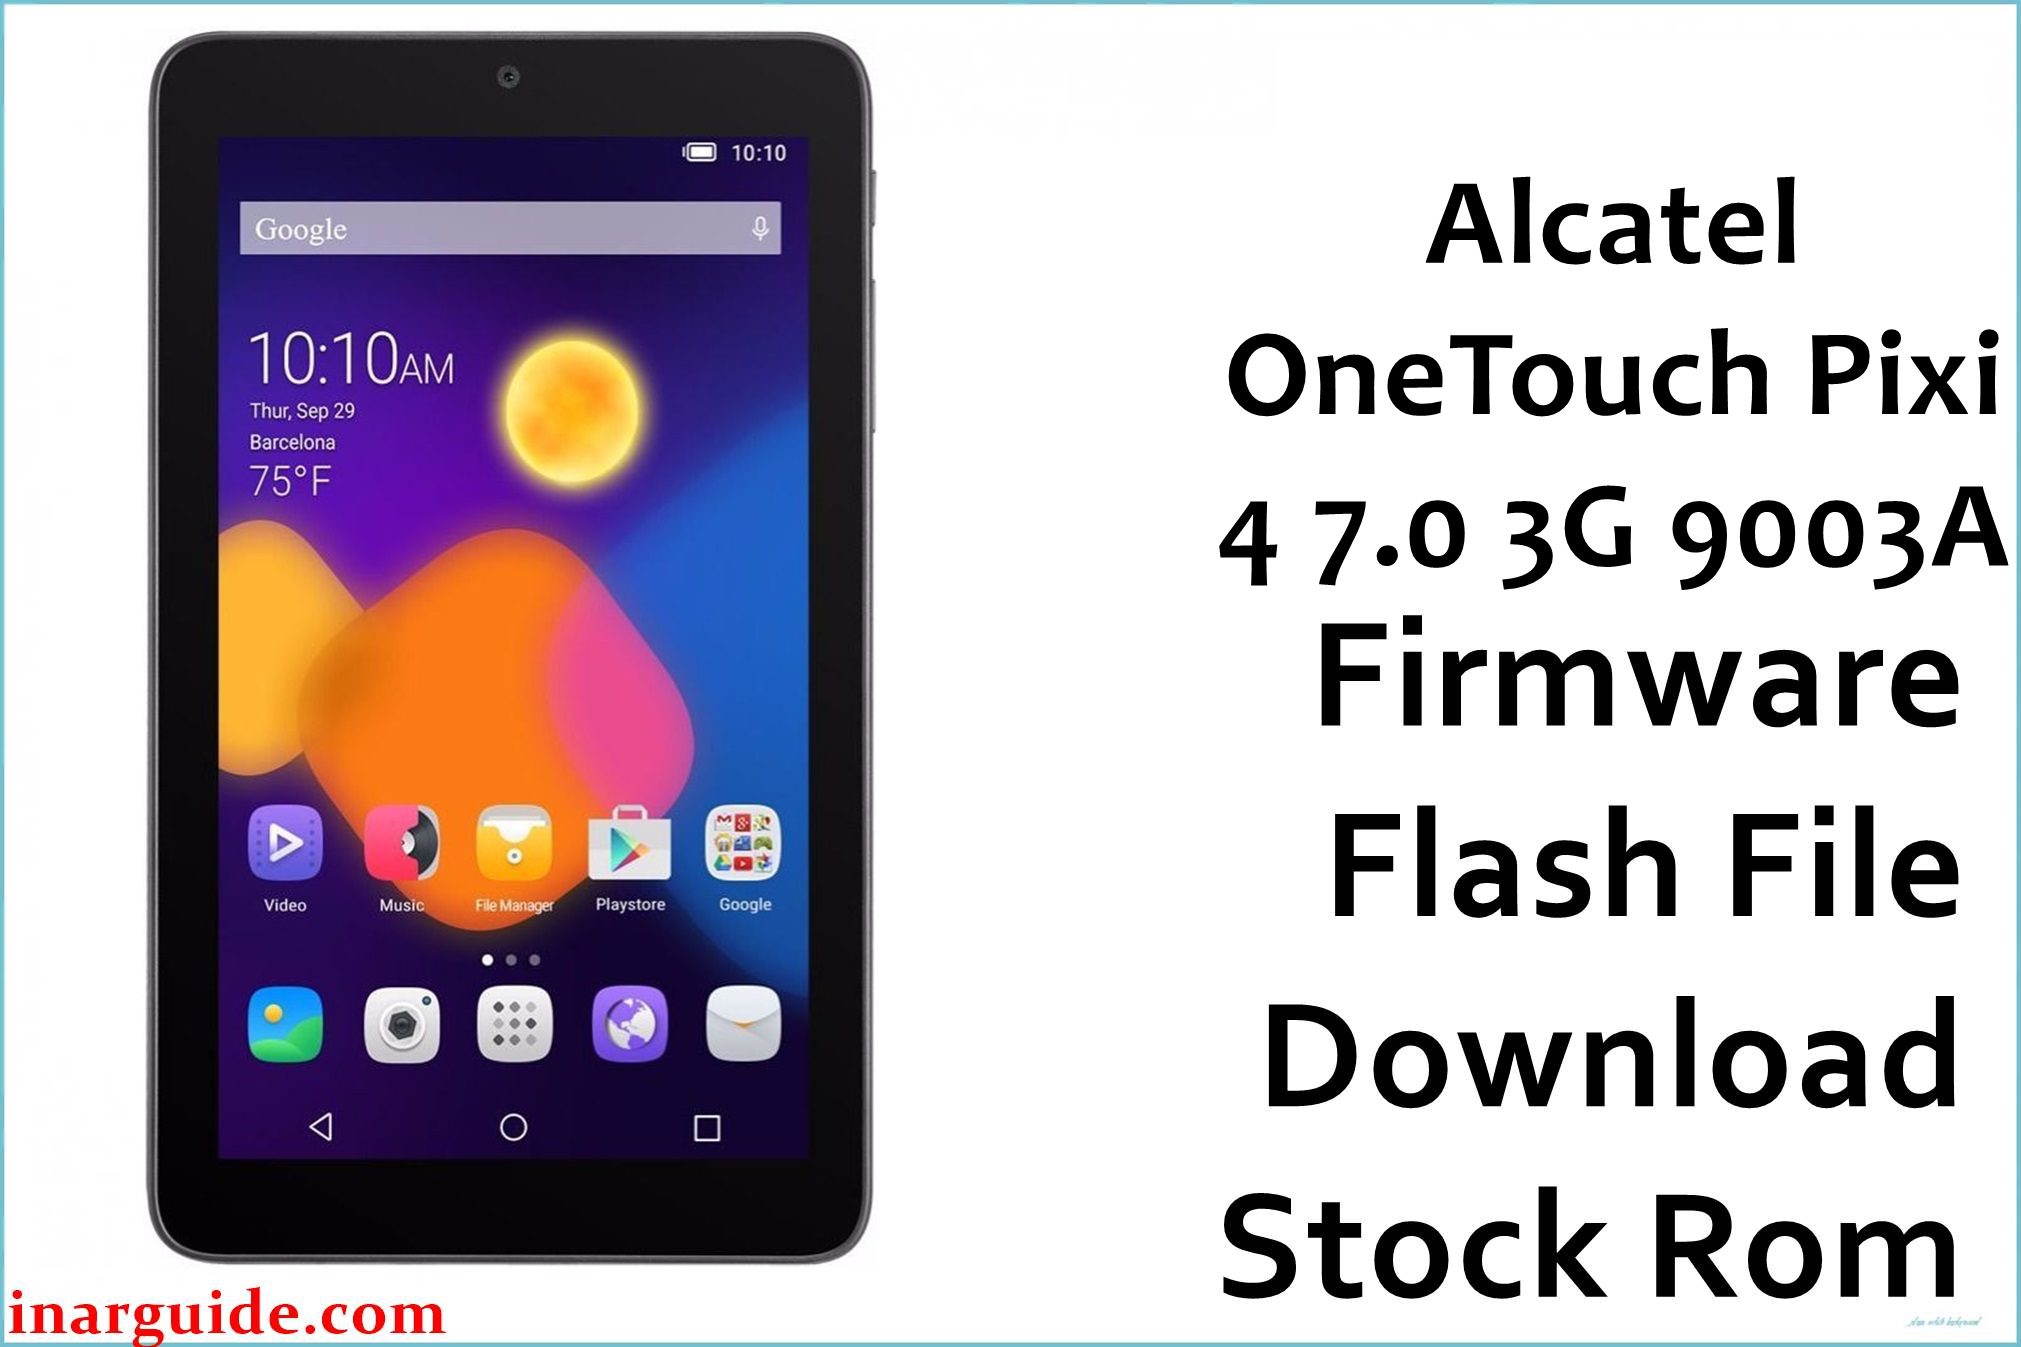 Alcatel OneTouch Pixi 4 7.0 3G 9003A